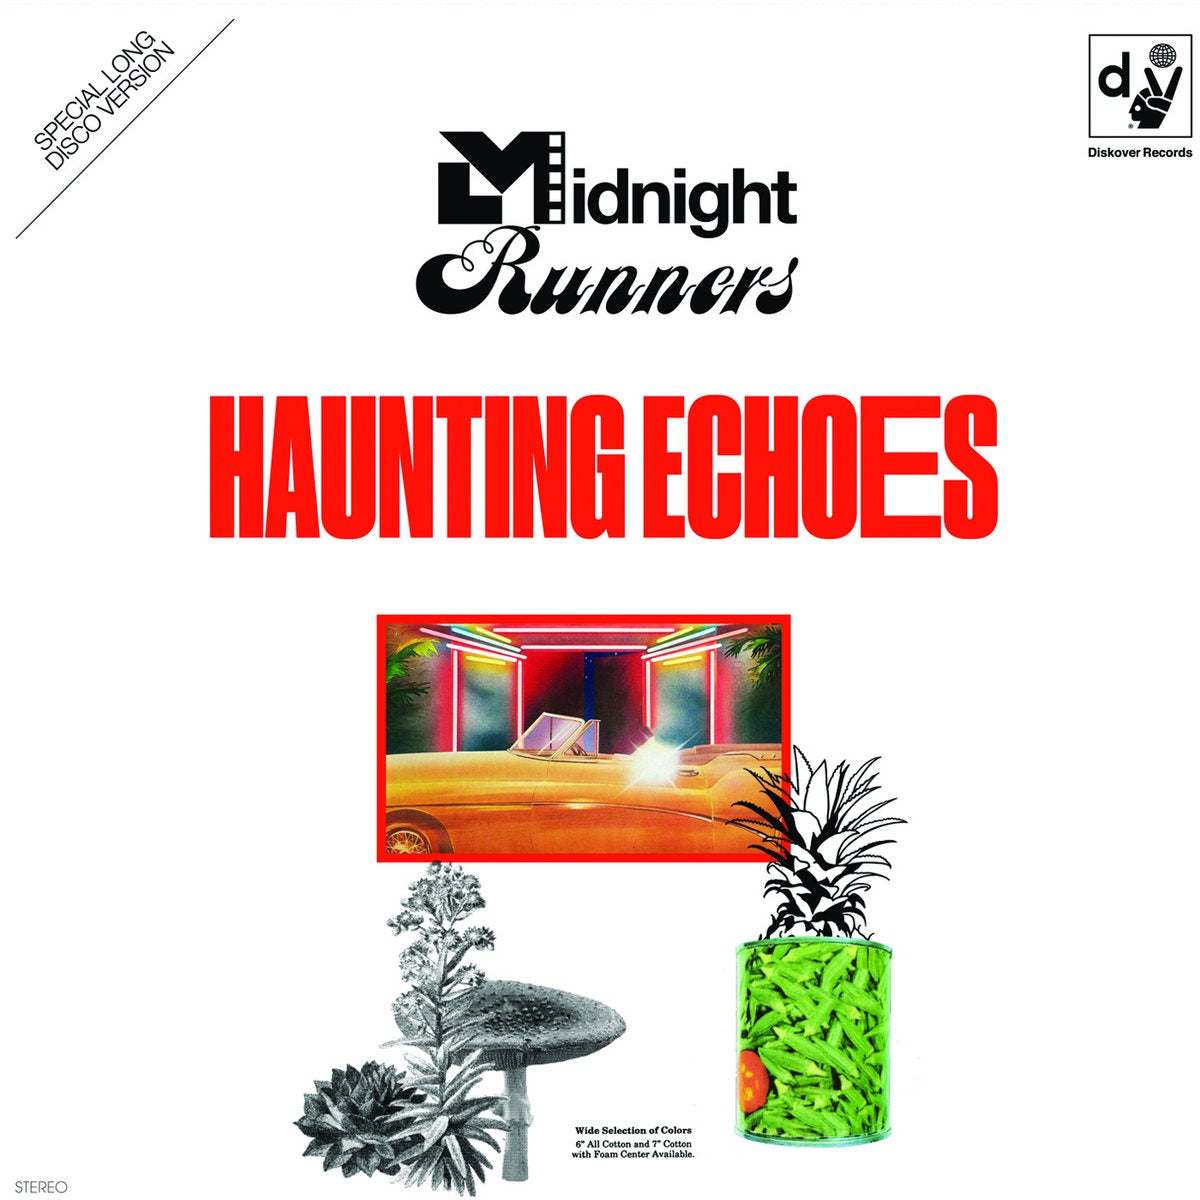 Midnight Runners – Haunting Echoes